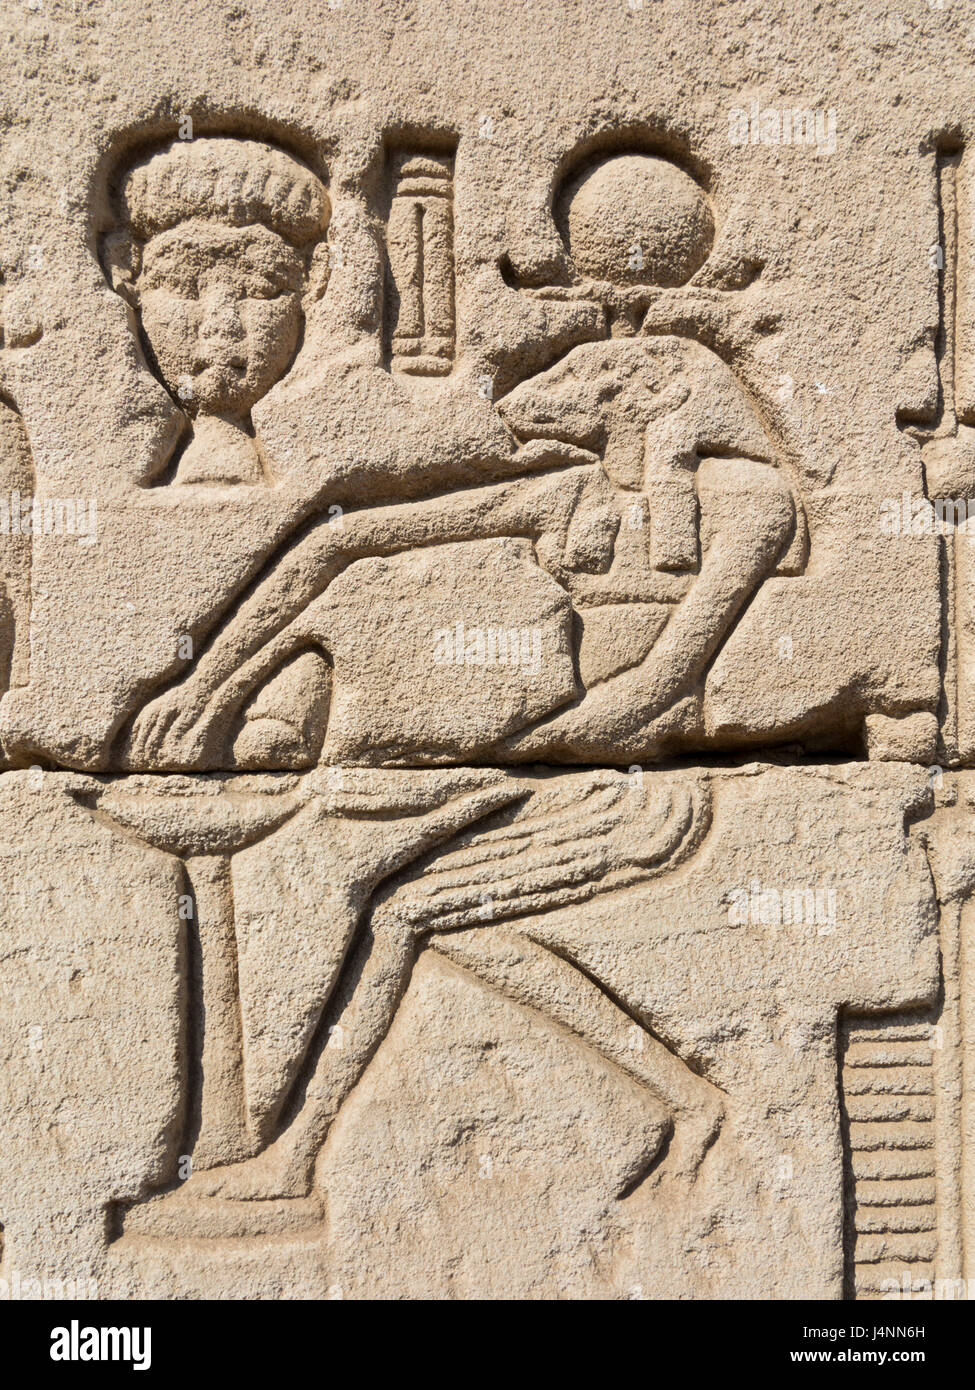 Relief work at Denderah Temple, near Qena City, Egypt Stock Photo